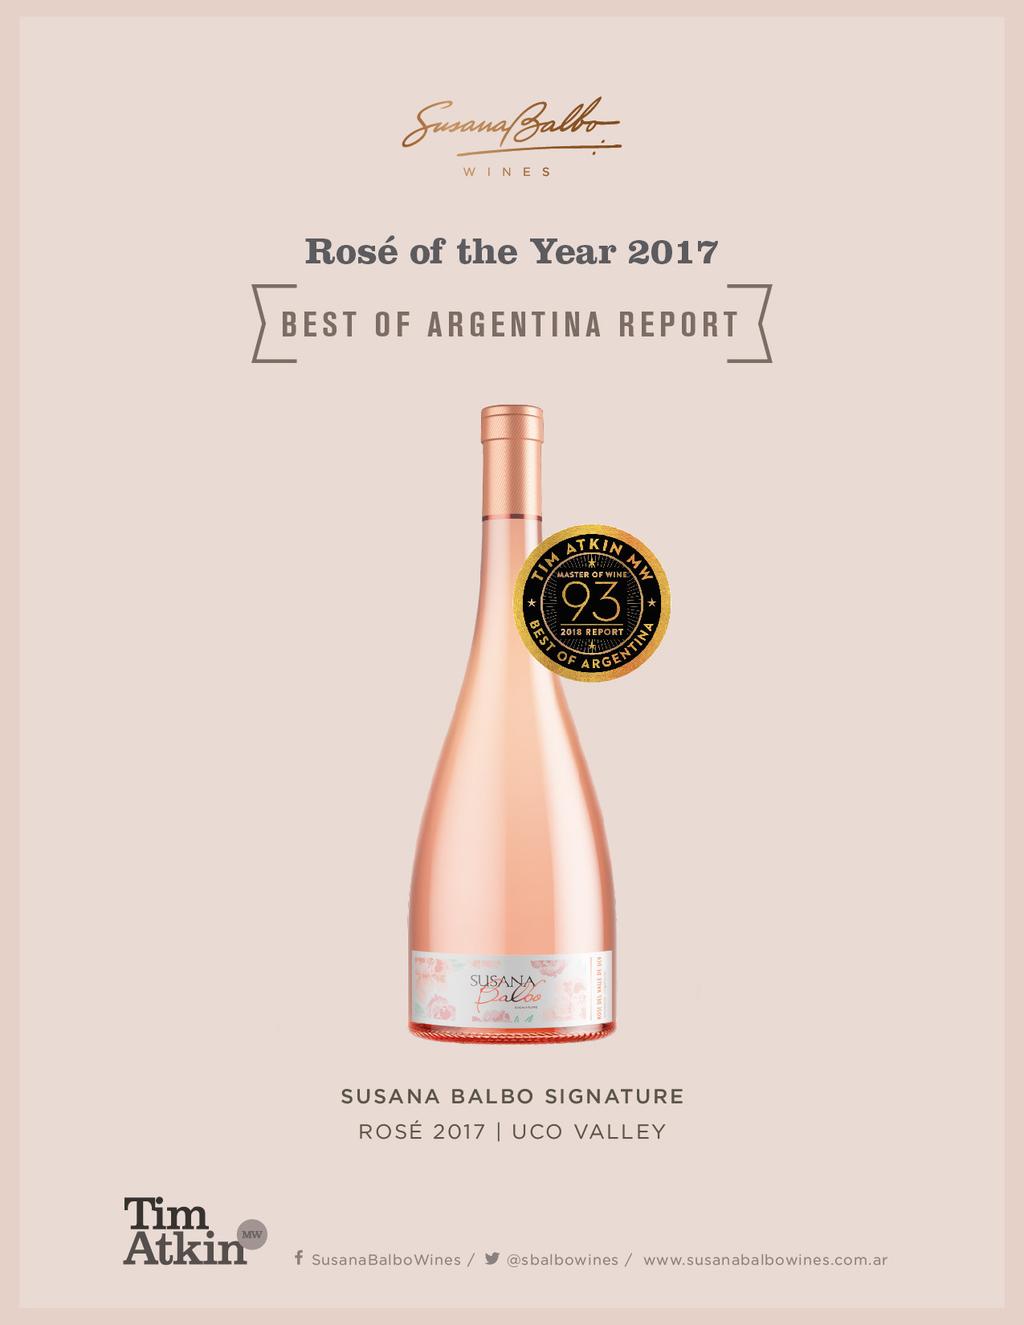 Susana Balbo Wines was also included on Atkin s list of First Growth wineries, a group that represents the most prestigious wineries and includes only 20 in Argentina.